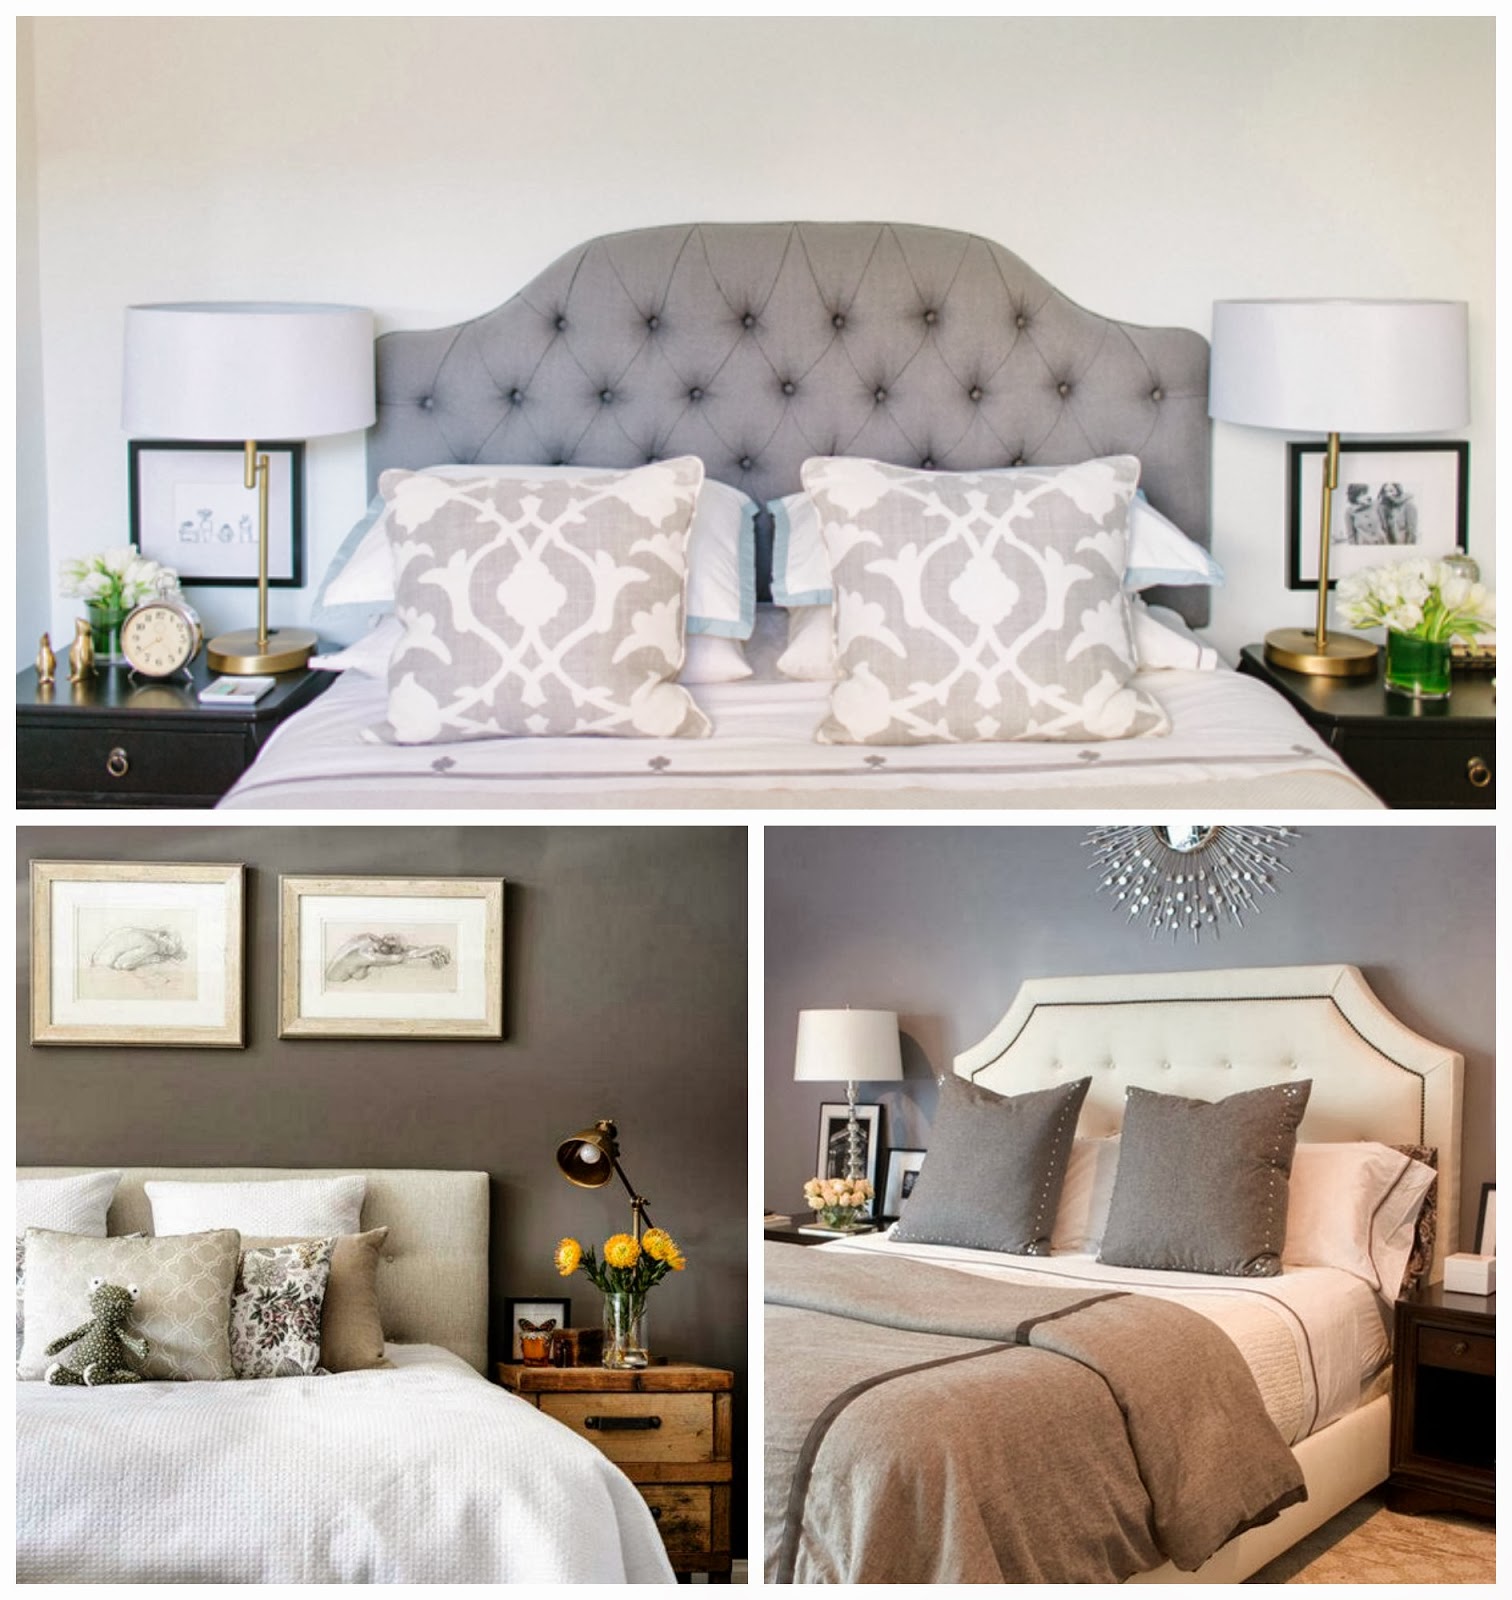 From Foothills to Fog: Bedroom Inspiration